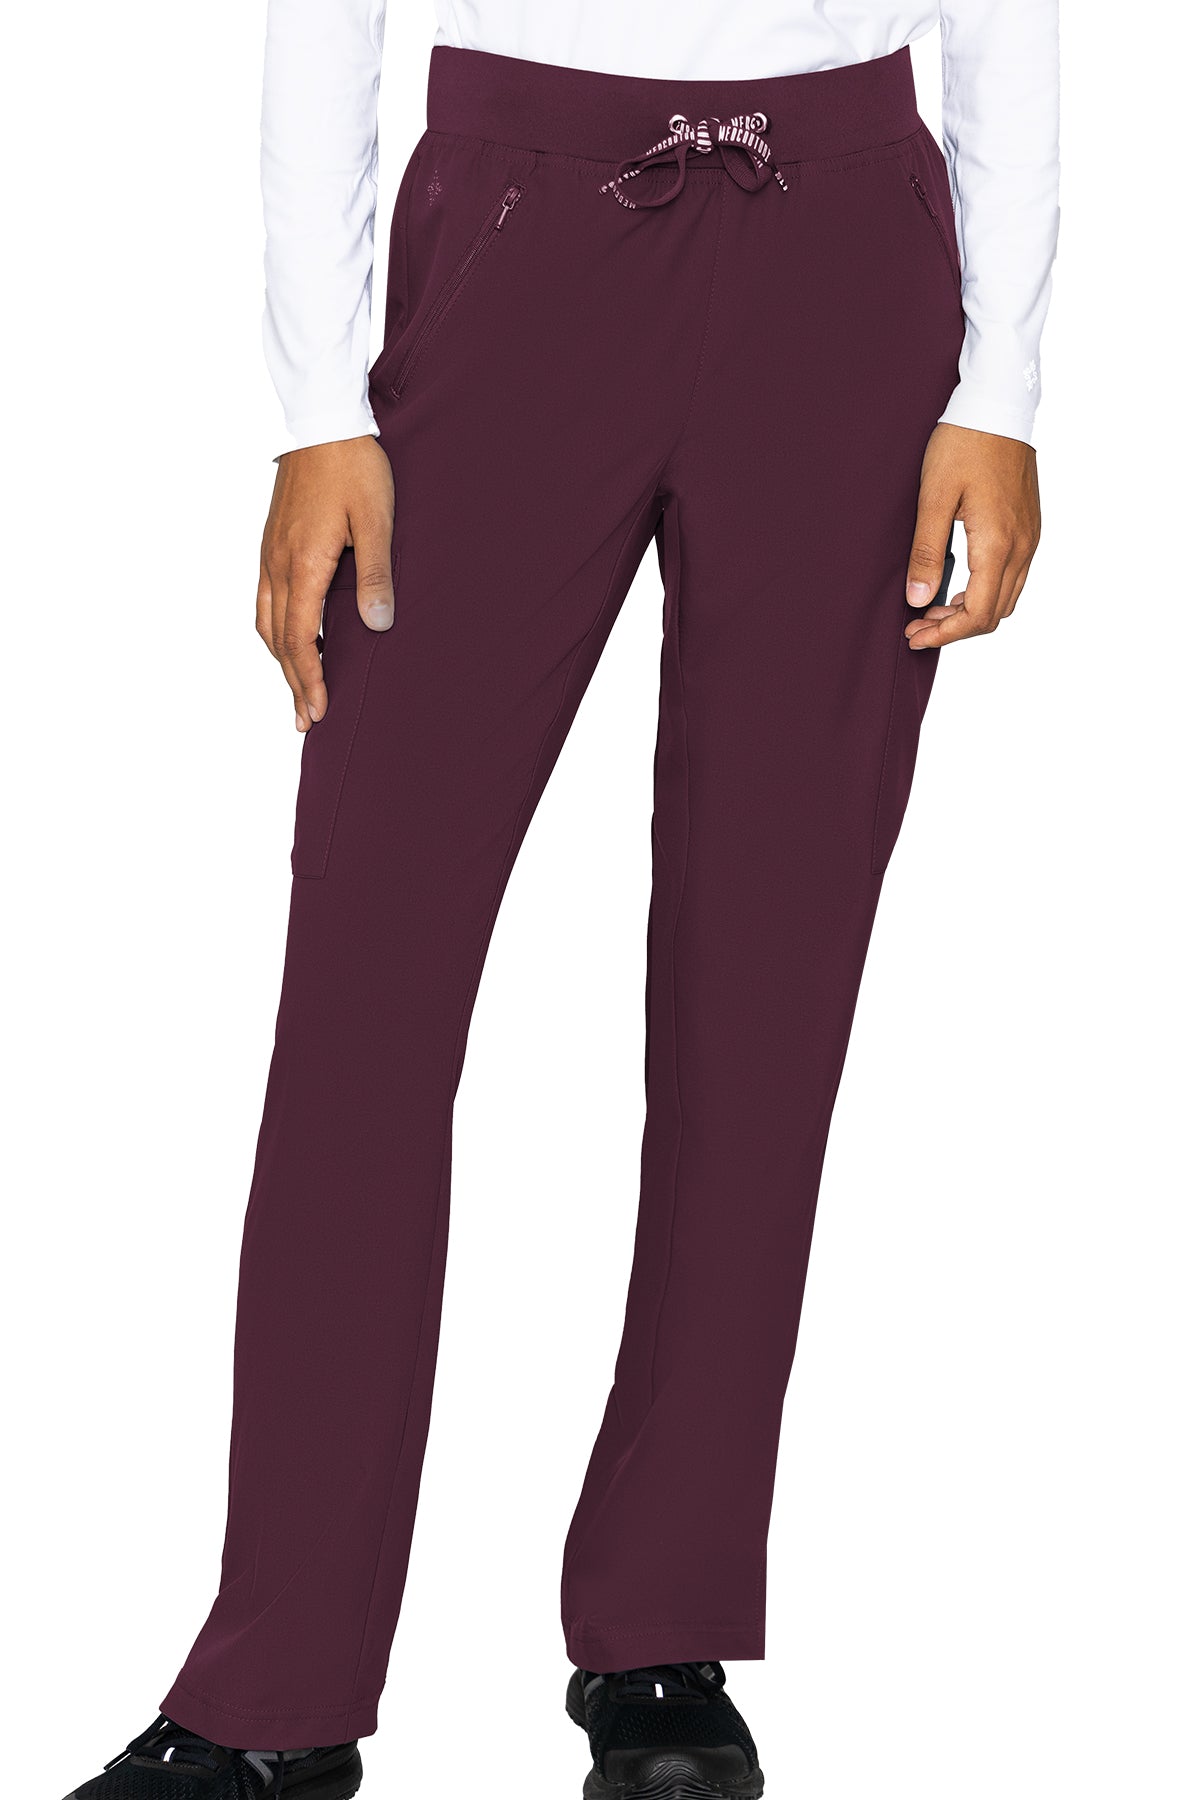 Med Couture Tall Scrub Pants Insight Zipper Pant in Wine at Parker's Clothing and Shoes.